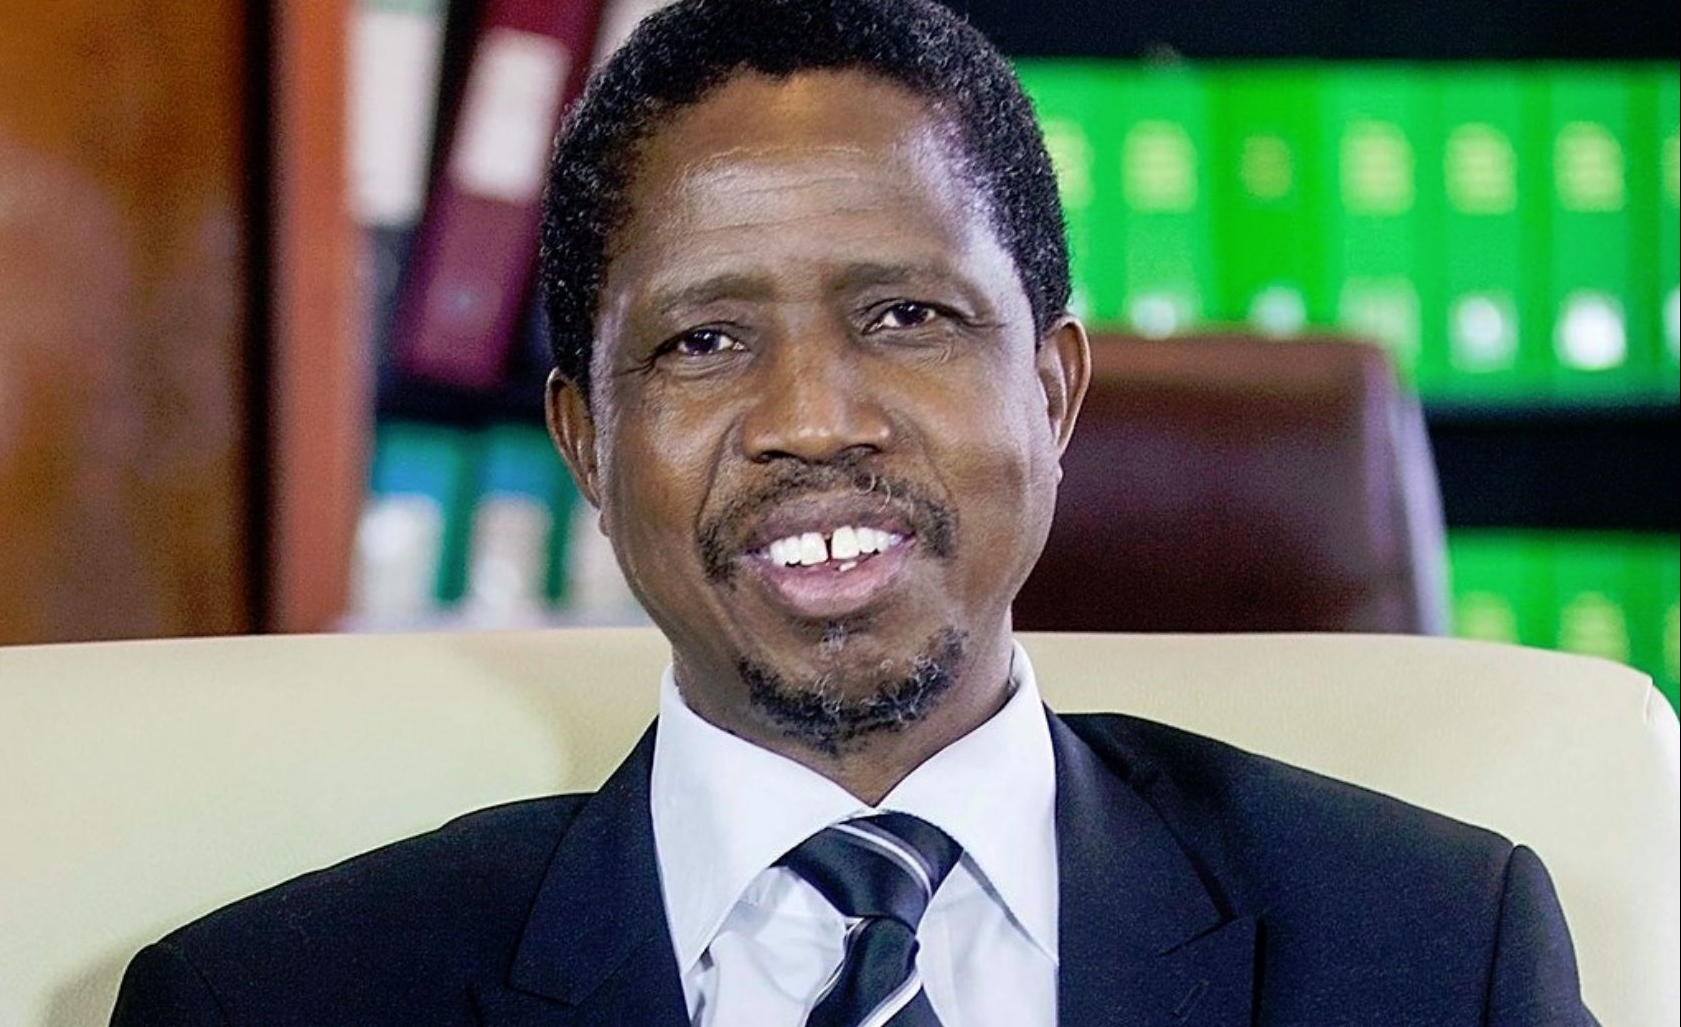 Zambia’s Former President Edgar Lungu Banned From ‘Political’ Jogging